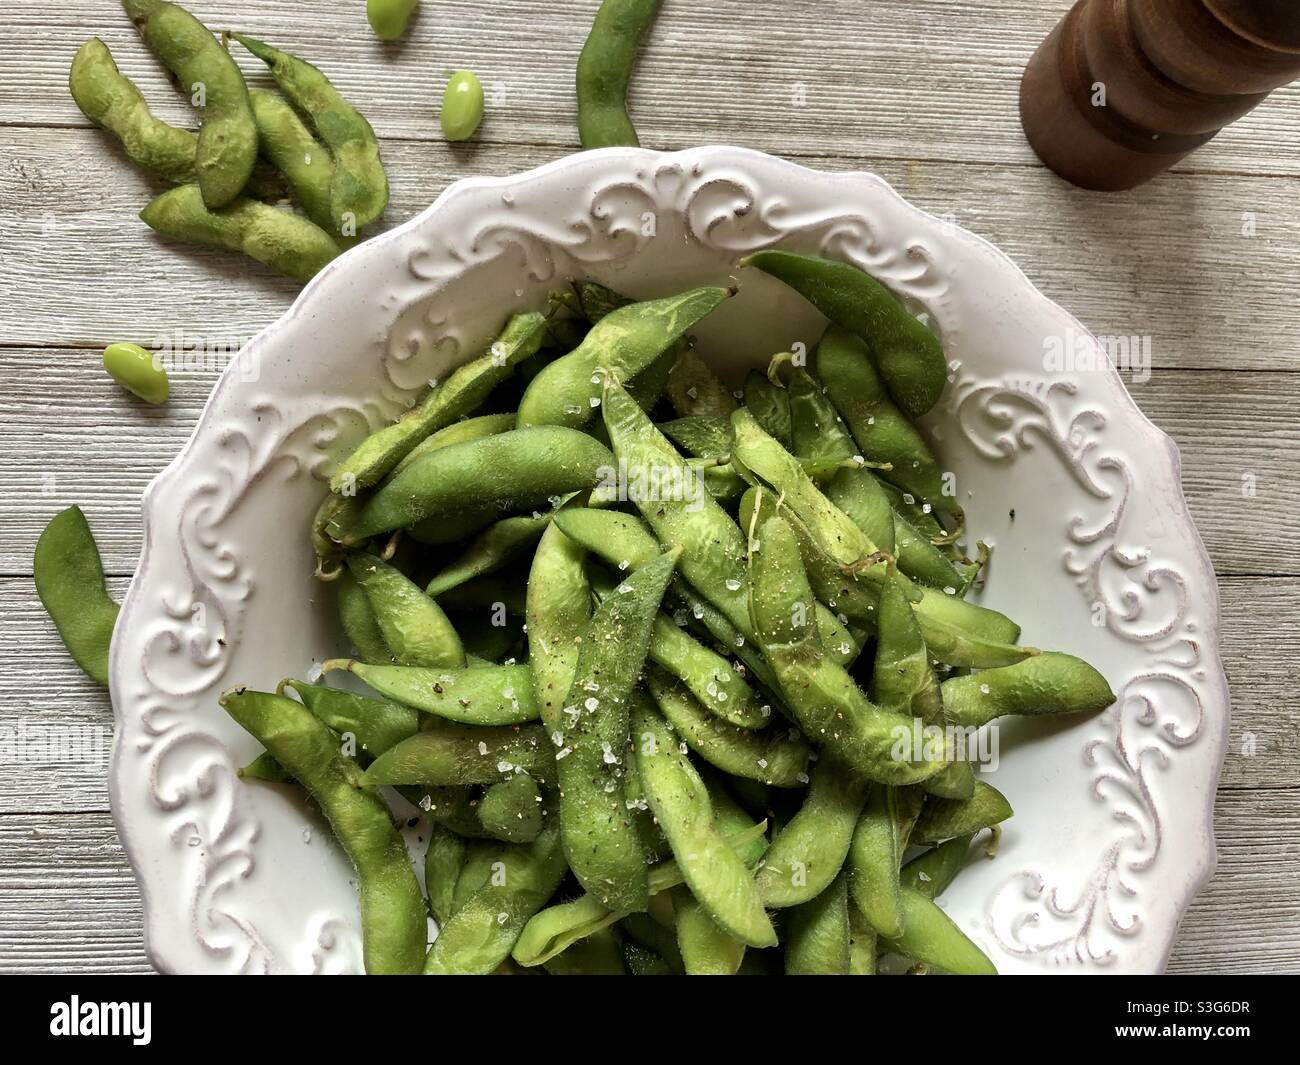 Edamame in a decorative white bowl, top view Stock Photo